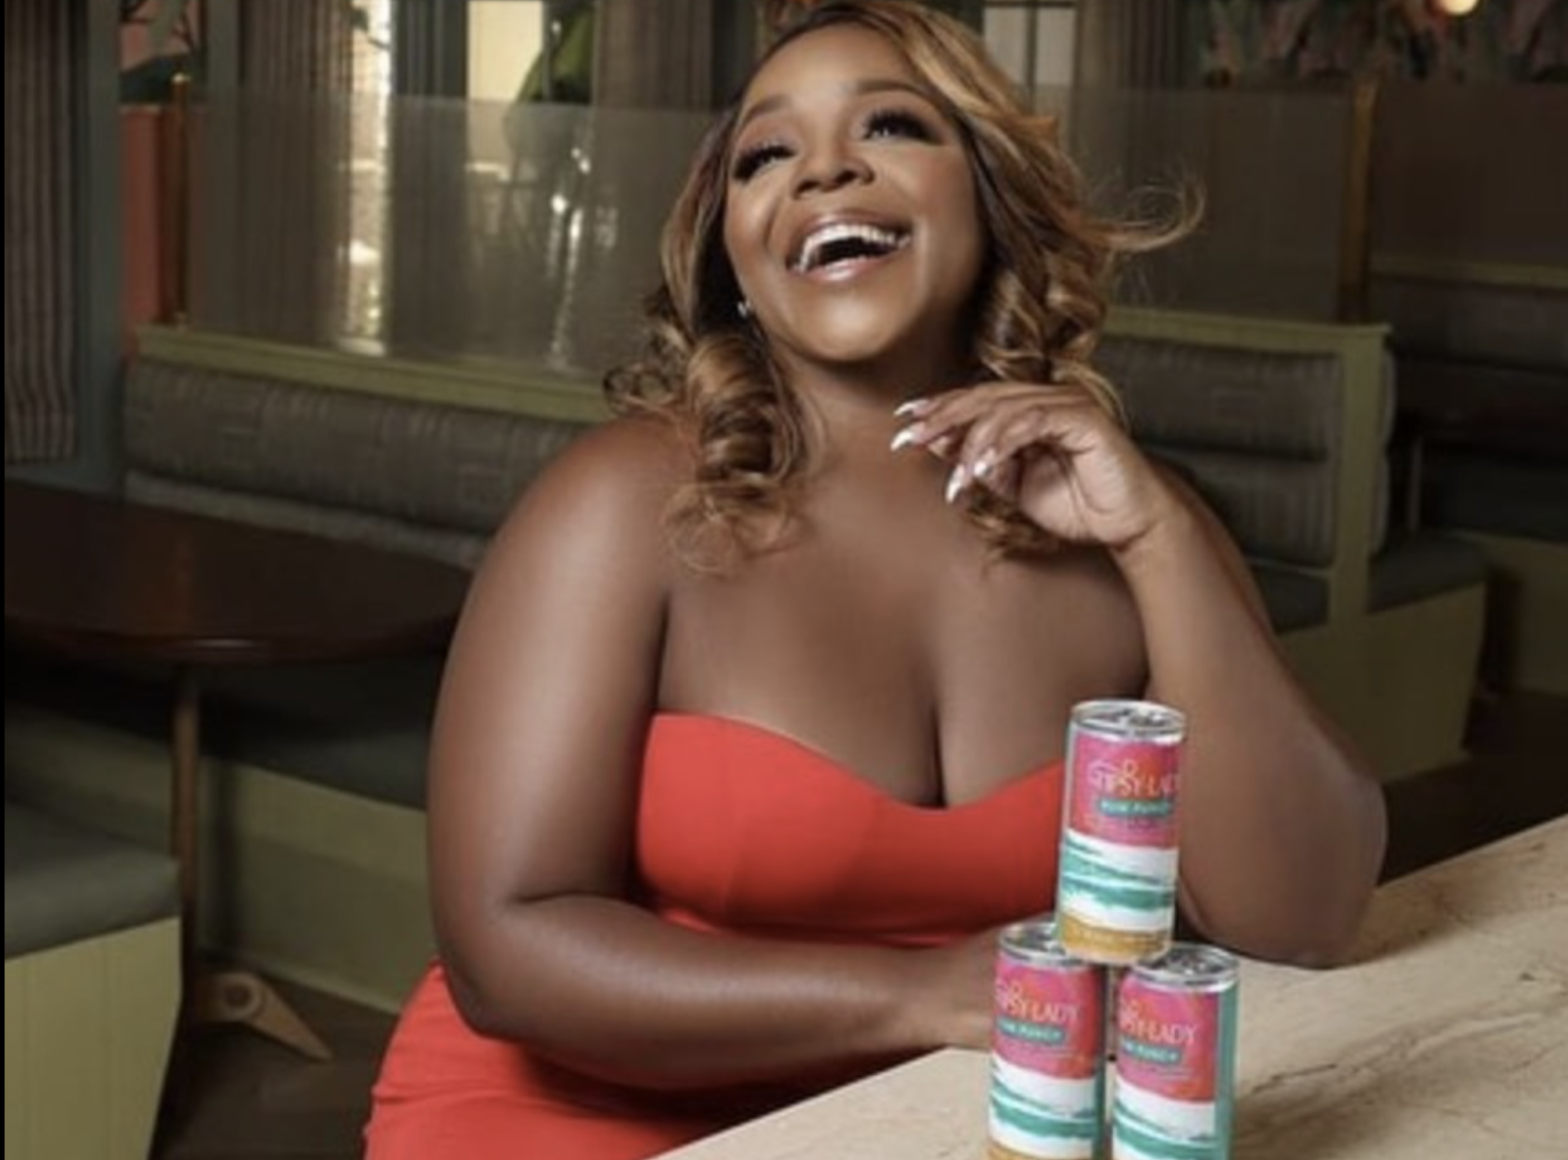 Tipsy Lady: Meet The Mom Who Just Launched This Caribbean-Inspired Canned Cocktail